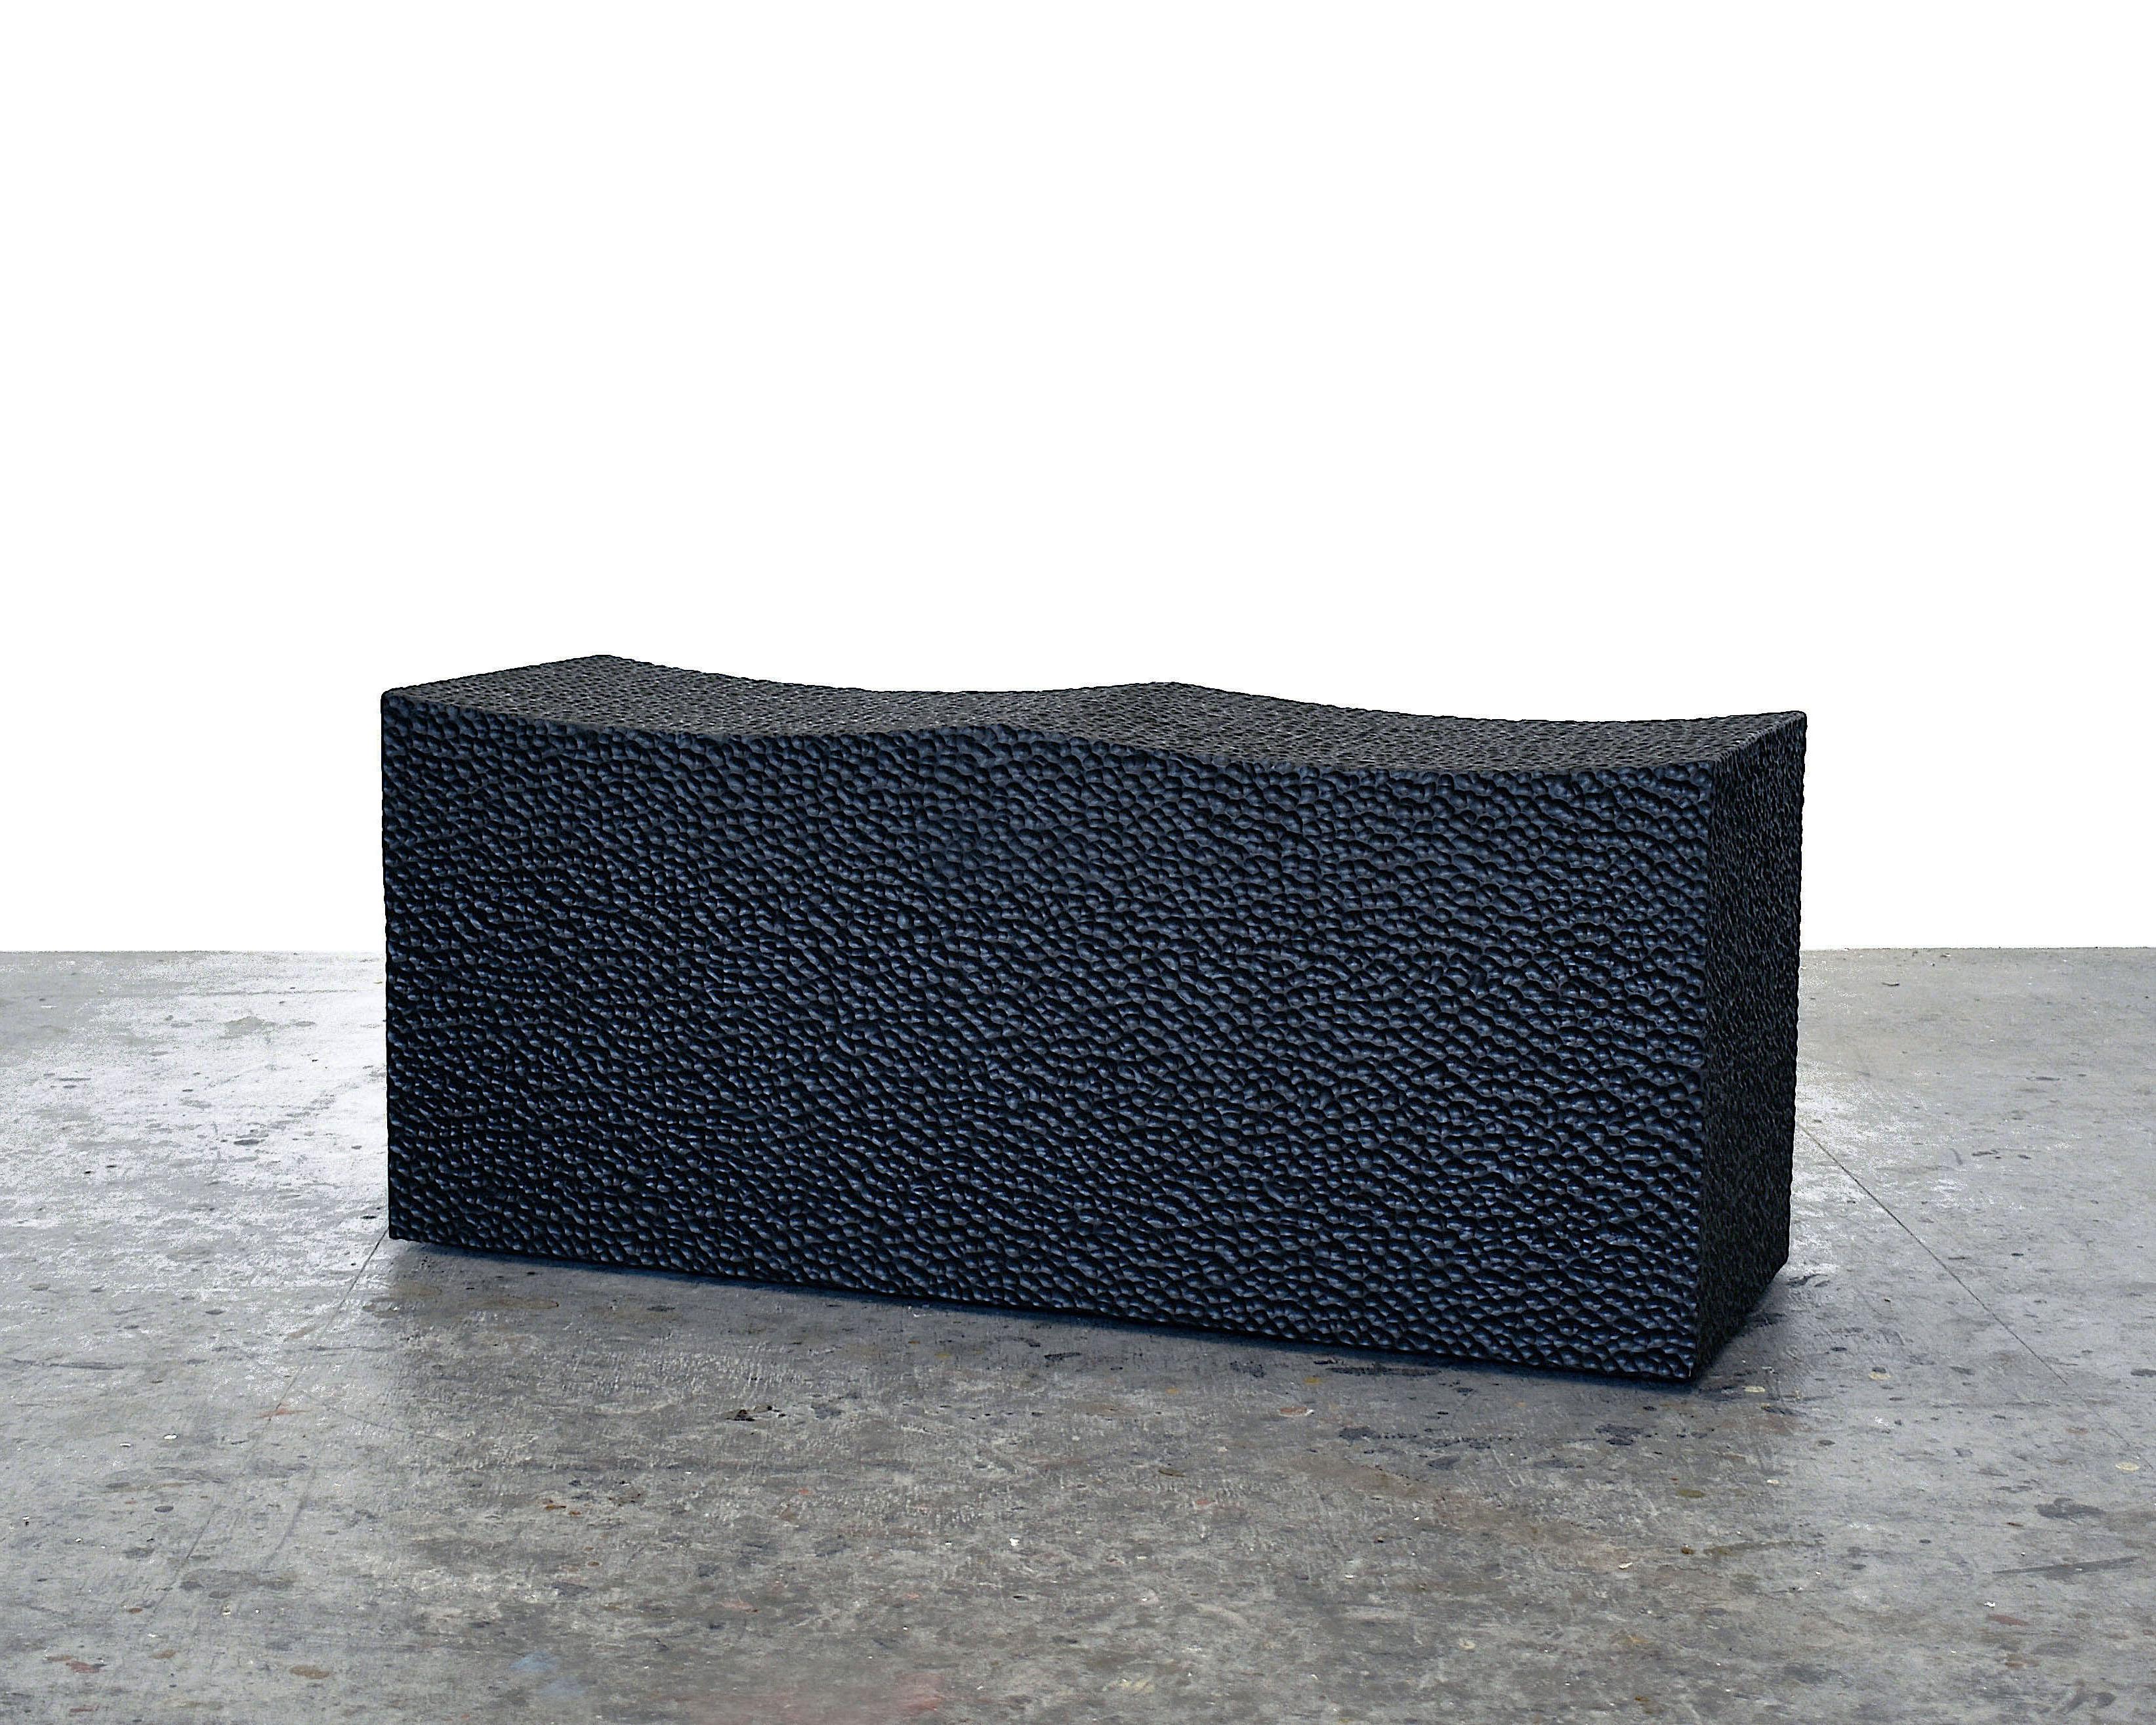 Maple block bench for two by John Eric Byers
Dimensions: 43 x 101.6 x 35.5 cm
Materials: Carved blackened maple

All works are individually handmade to order.

John Eric Byers creates geometrically inspired pieces that are minimal, emotional,